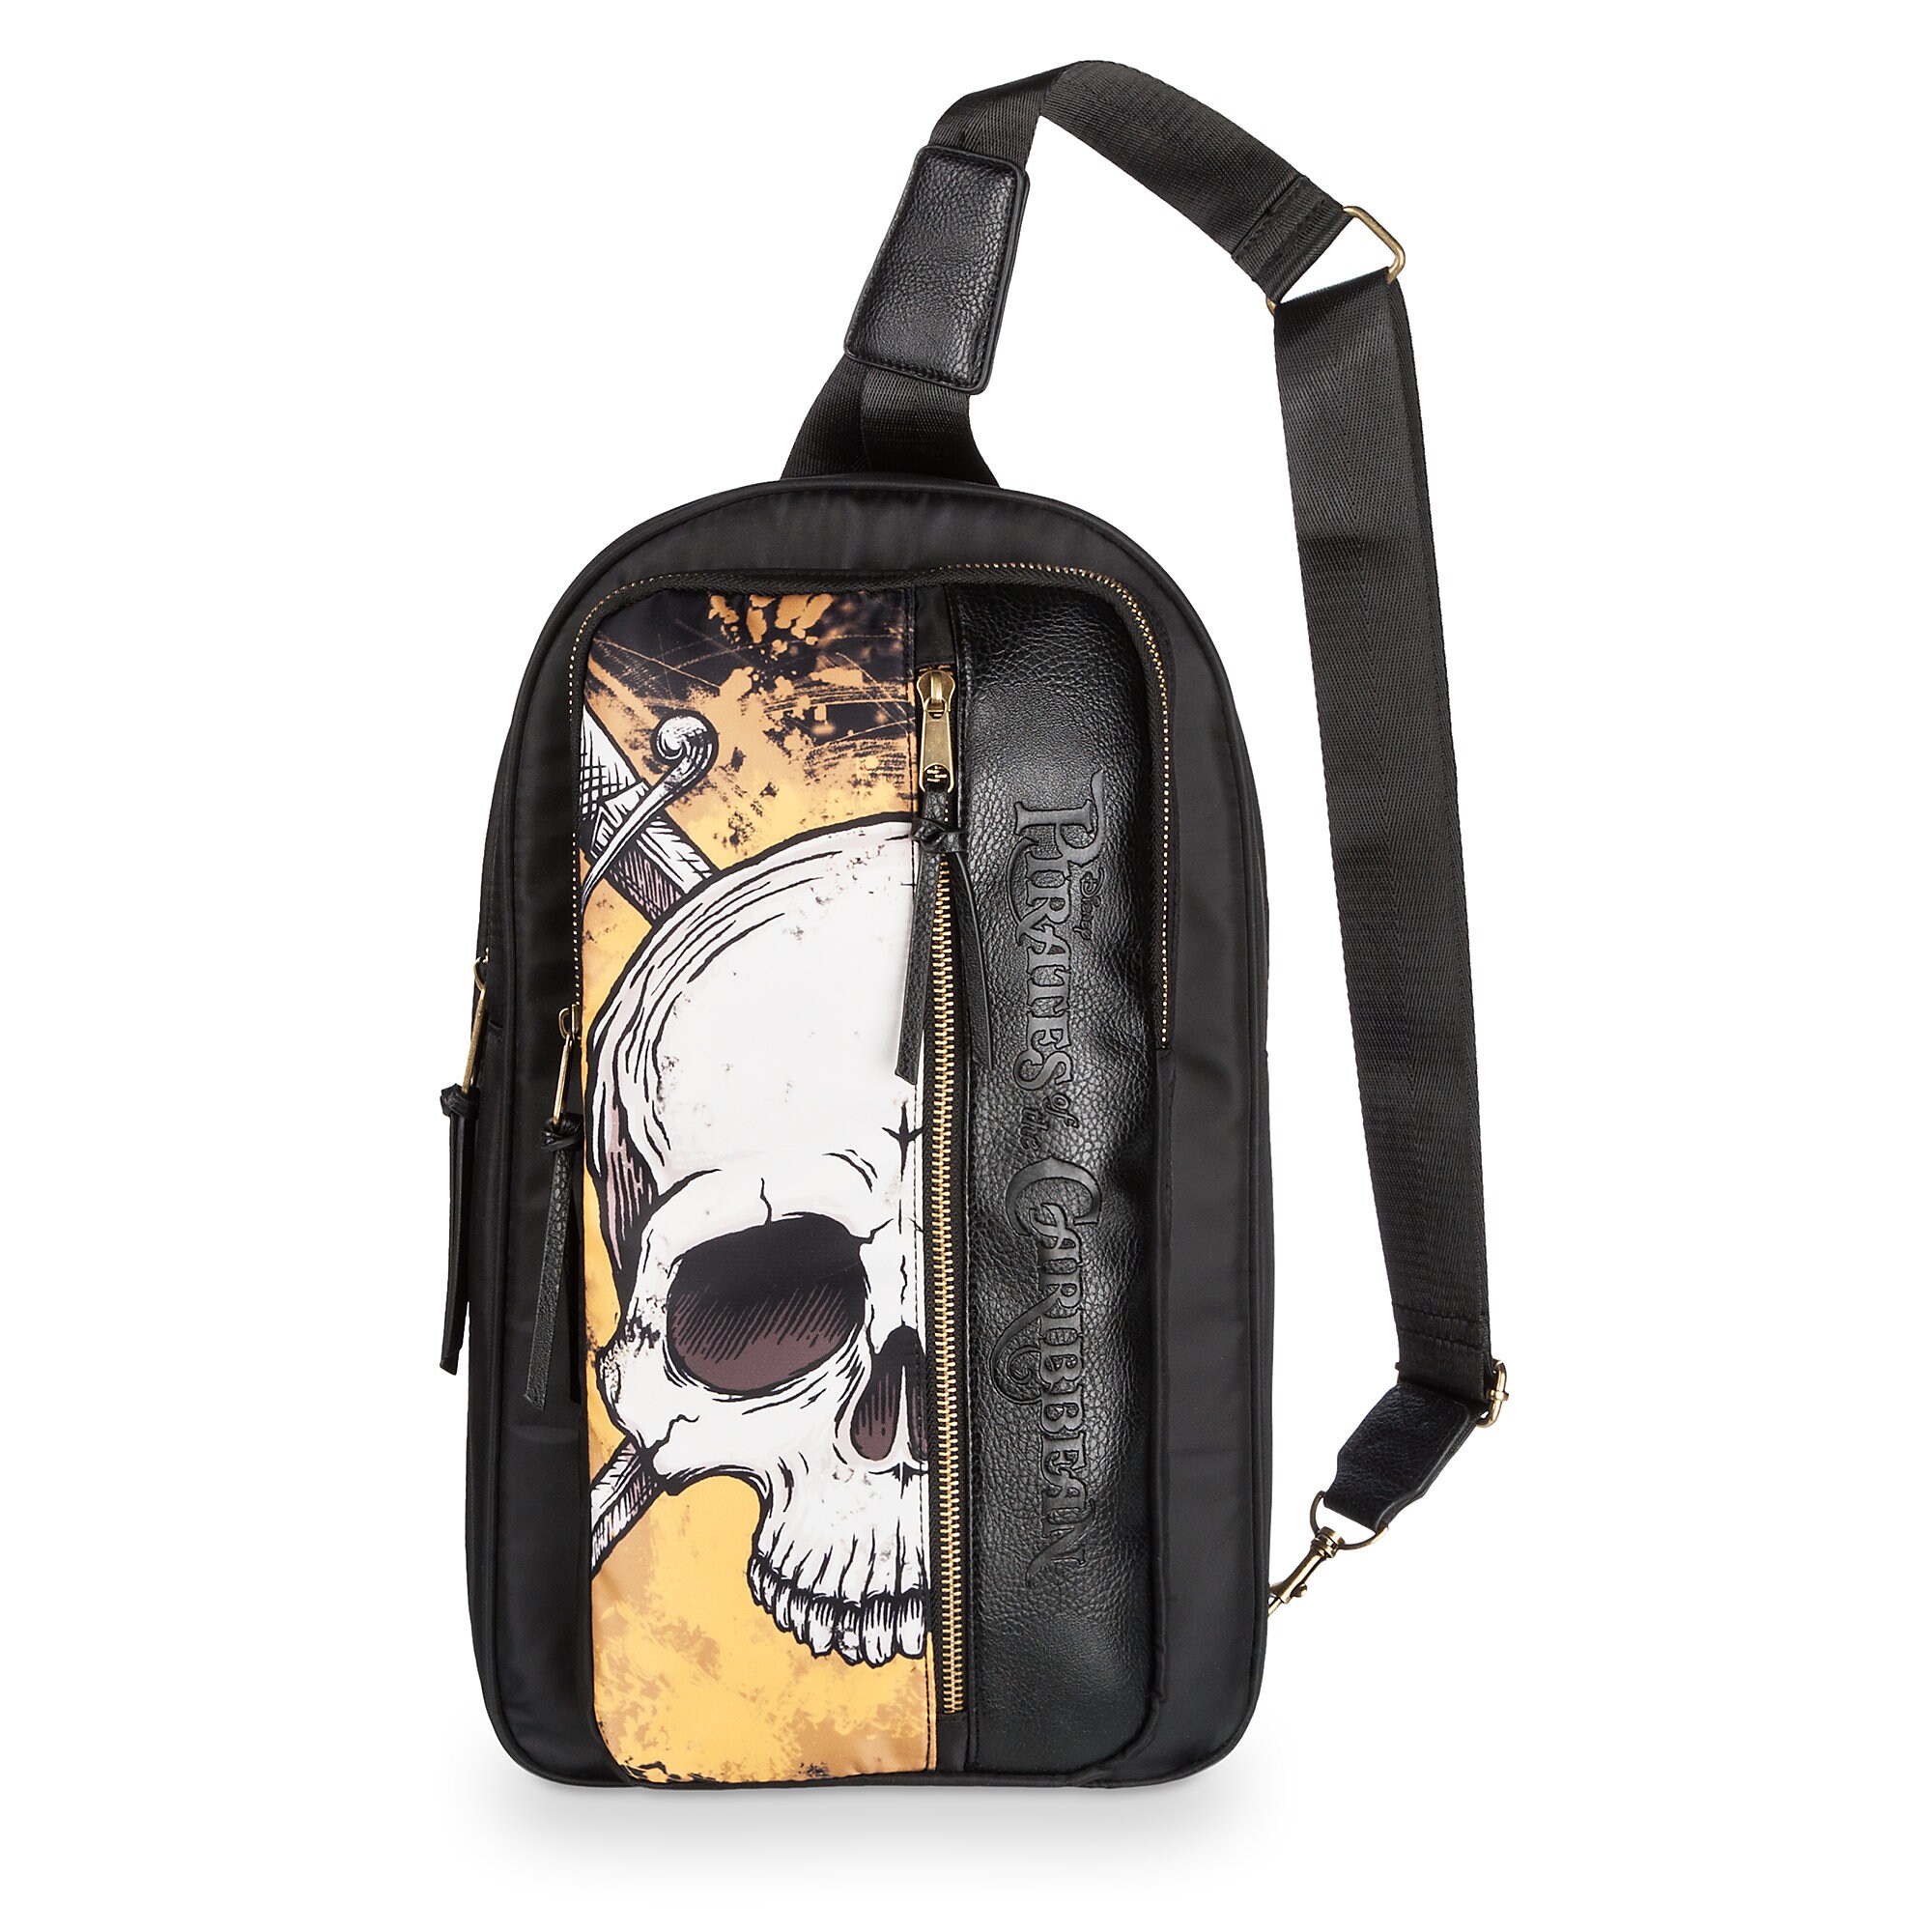 Pirates of the Caribbean Sling Backpack